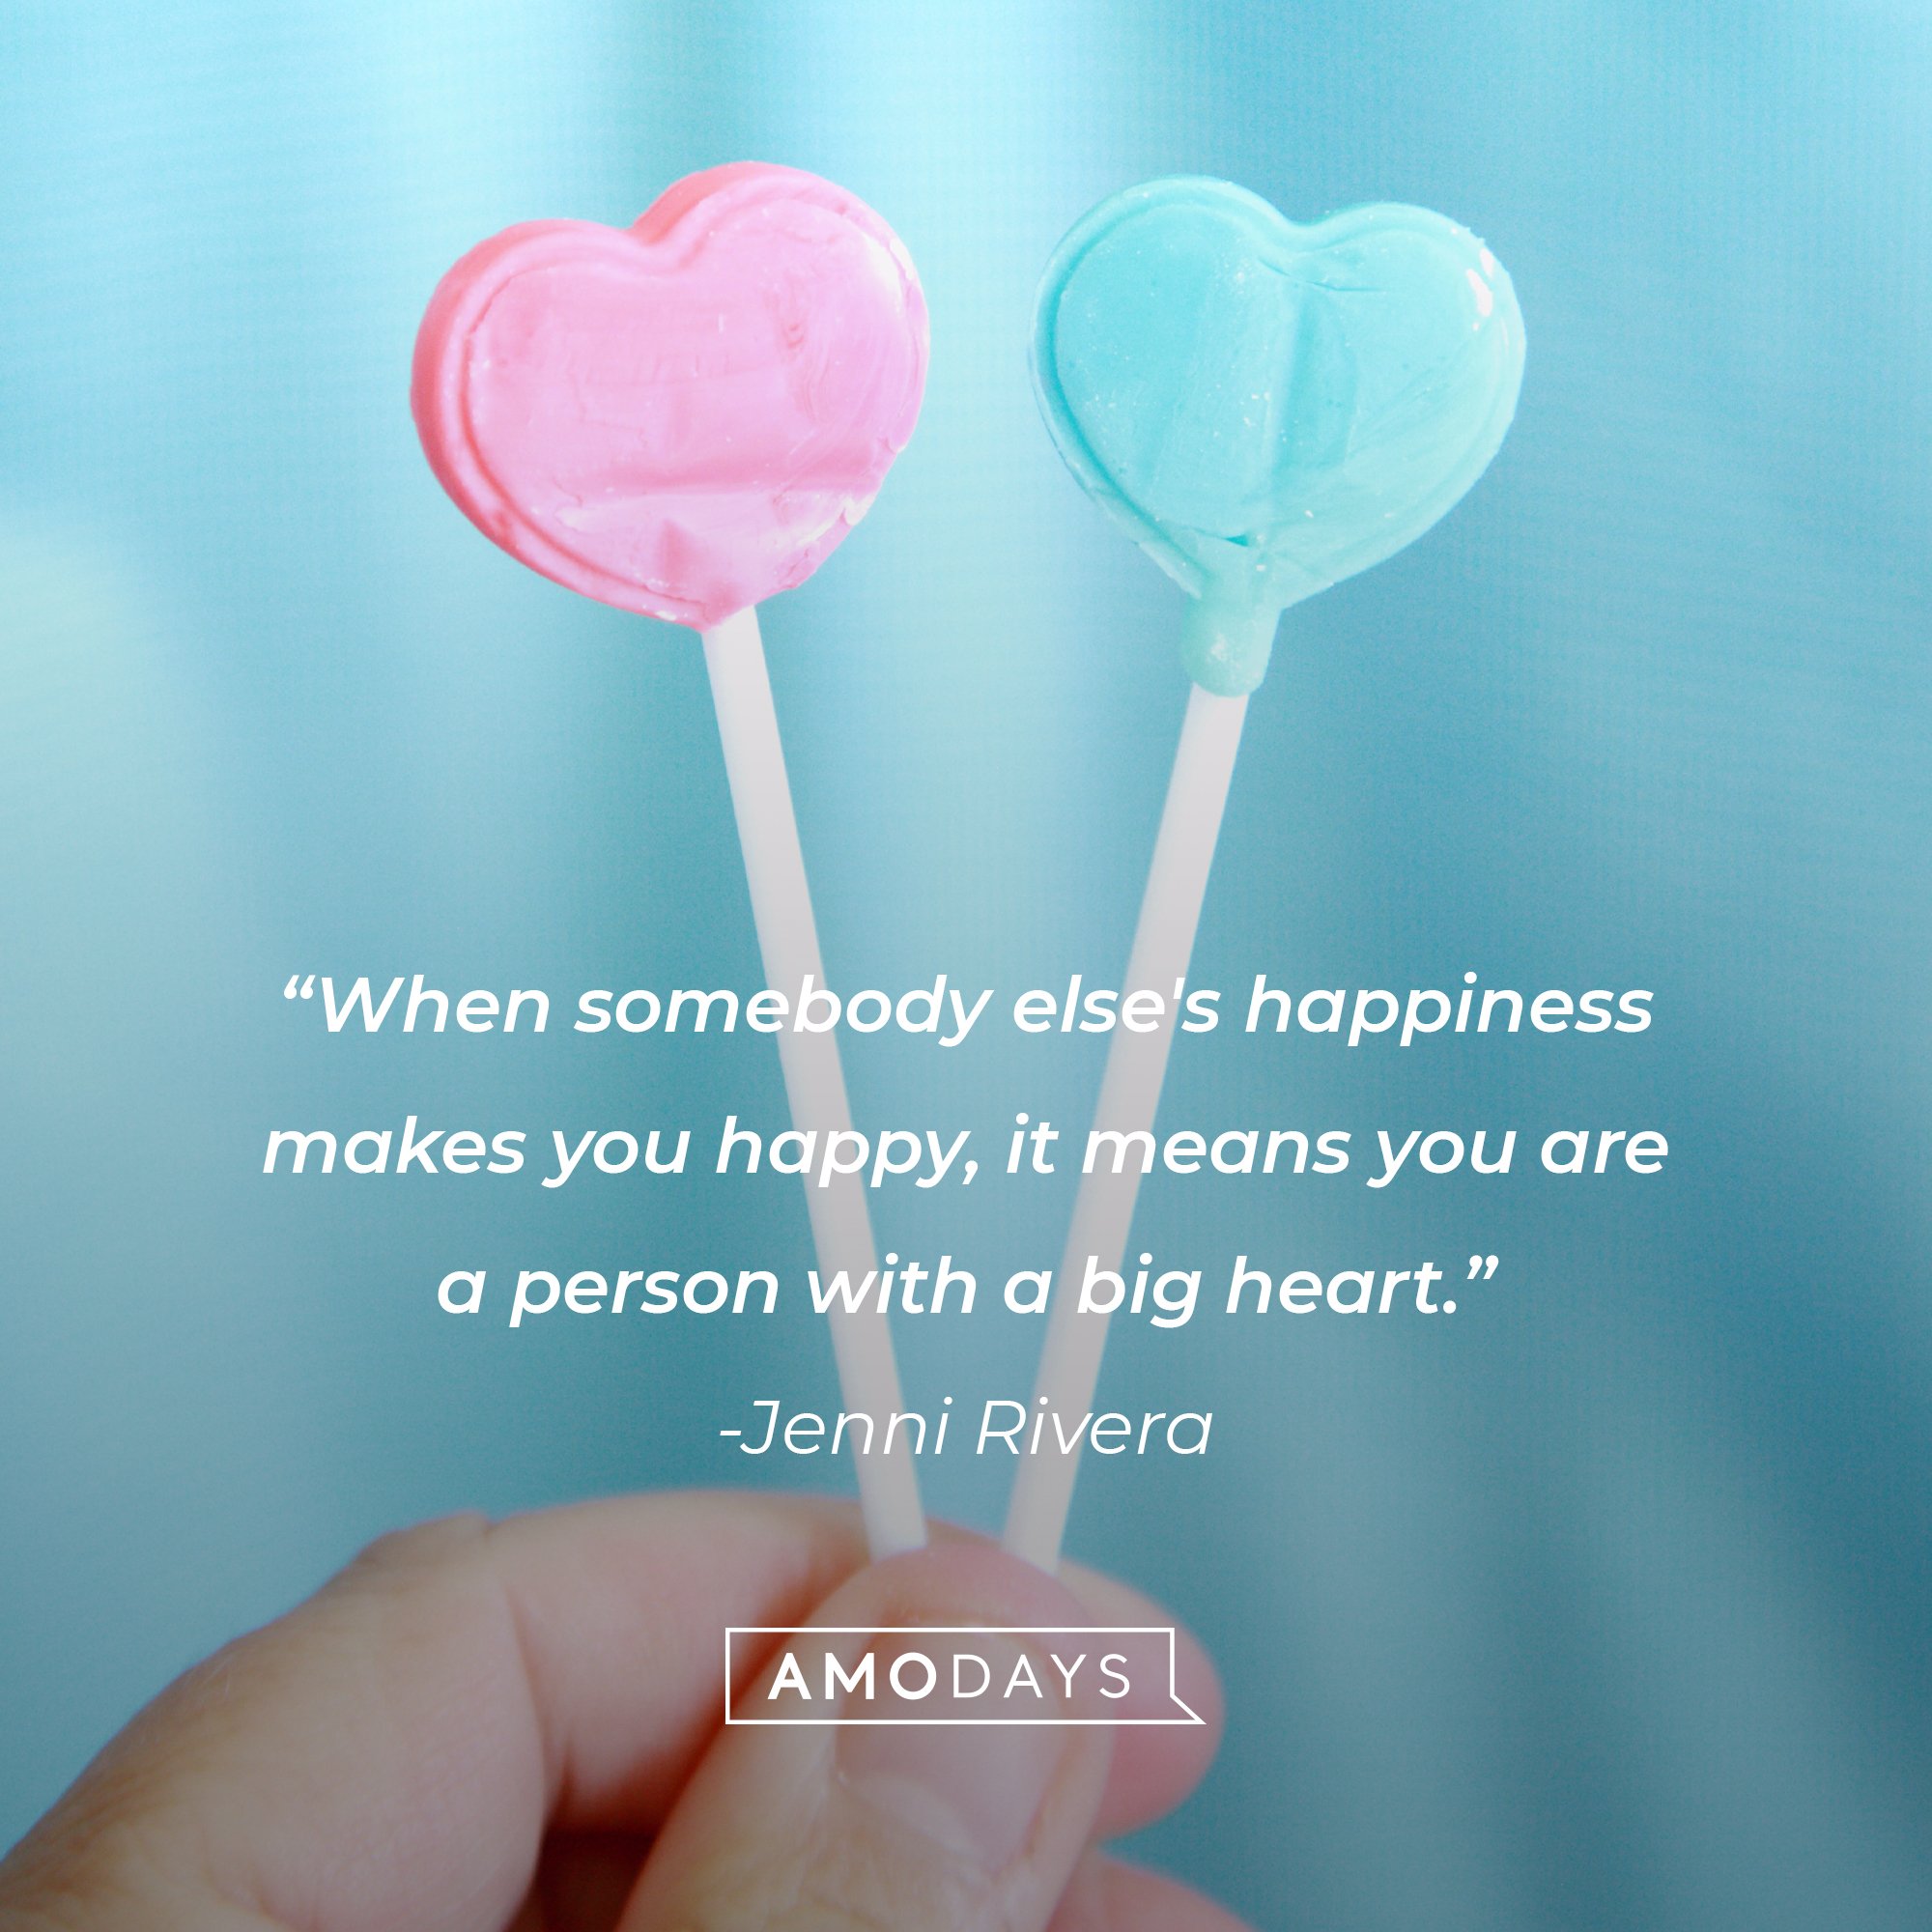 Jenni Rivera's quote: "When somebody else's happiness makes you happy, it means you are a person with a big heart." | Image: AmoDays